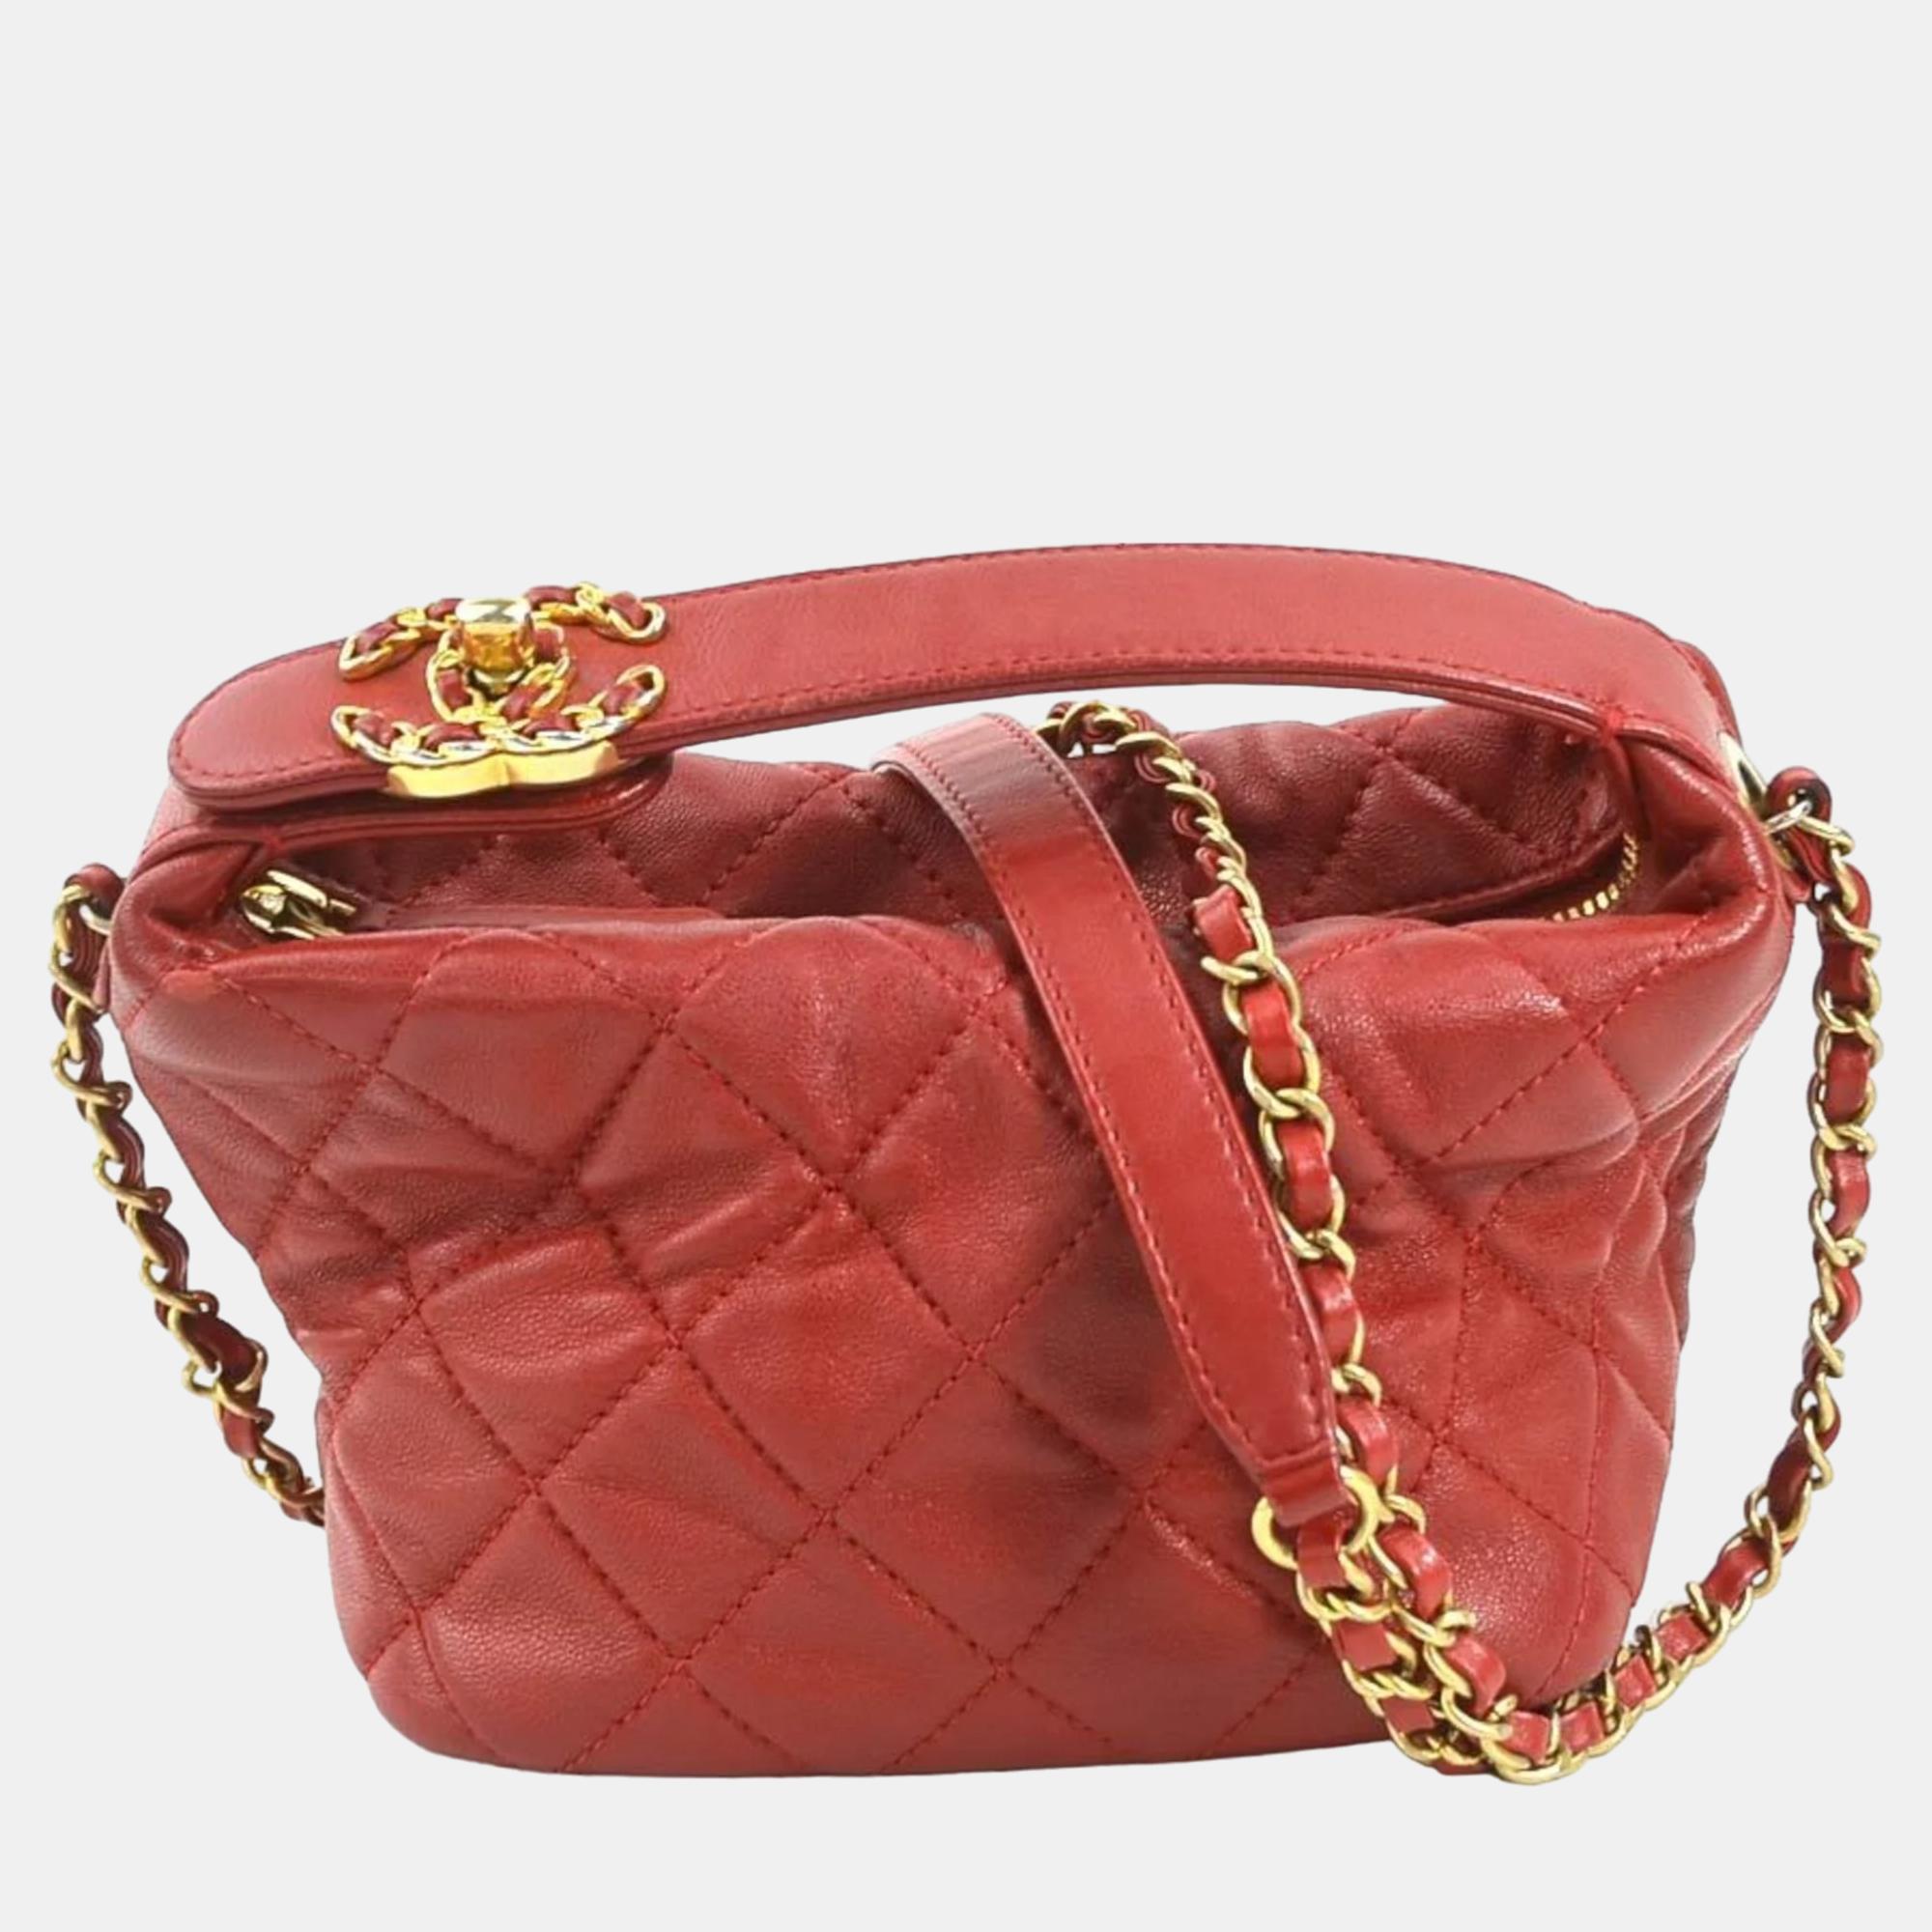 Chanel red leather cc hobo bag